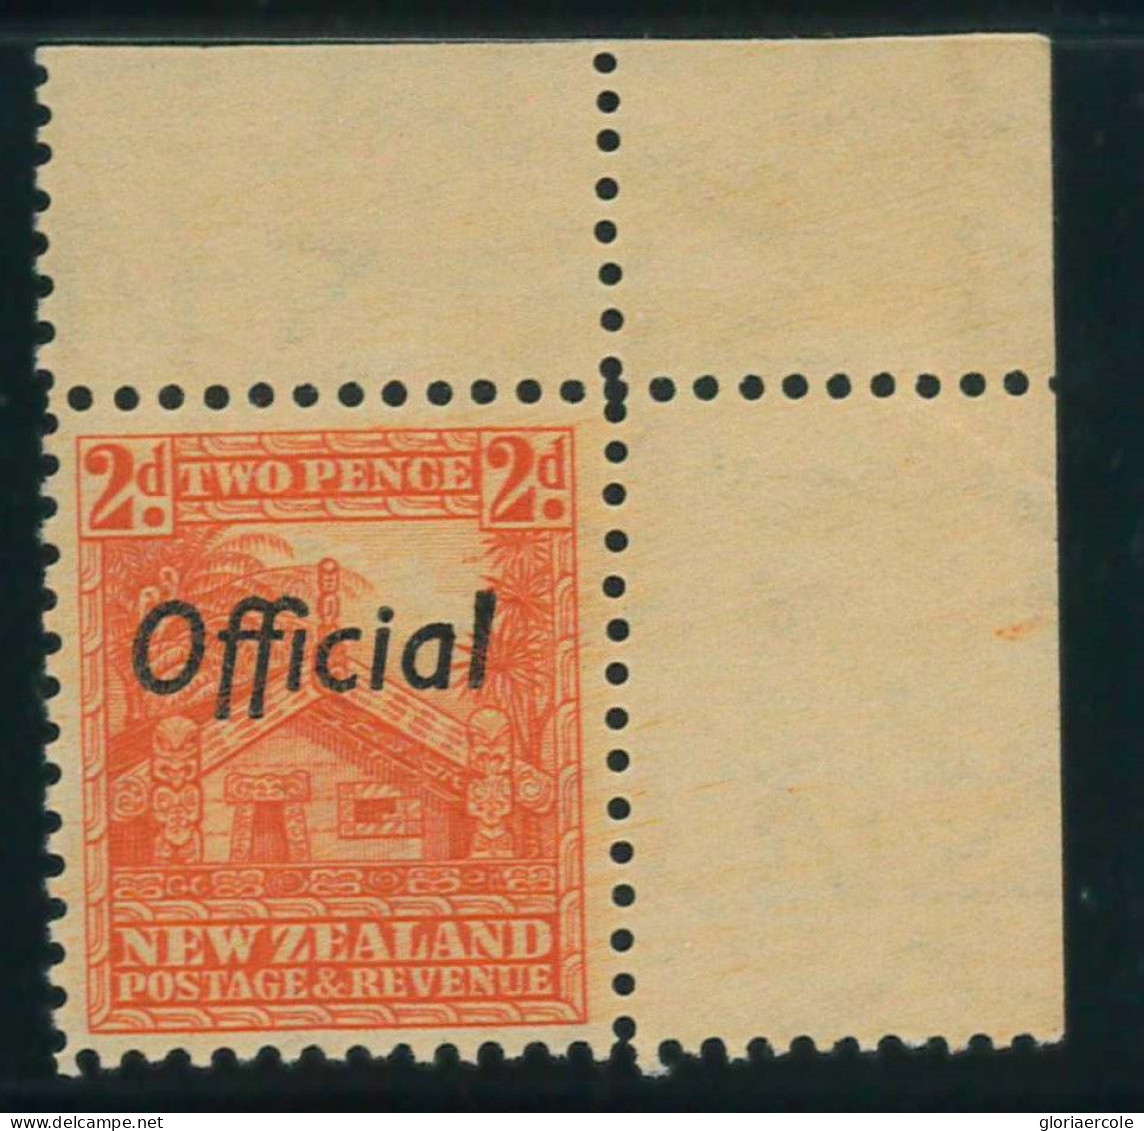 P3081 C - NEW ZEALAND, OFFICIAL STAMP S.GIBBONS, 0123 B MNH - Oficiales